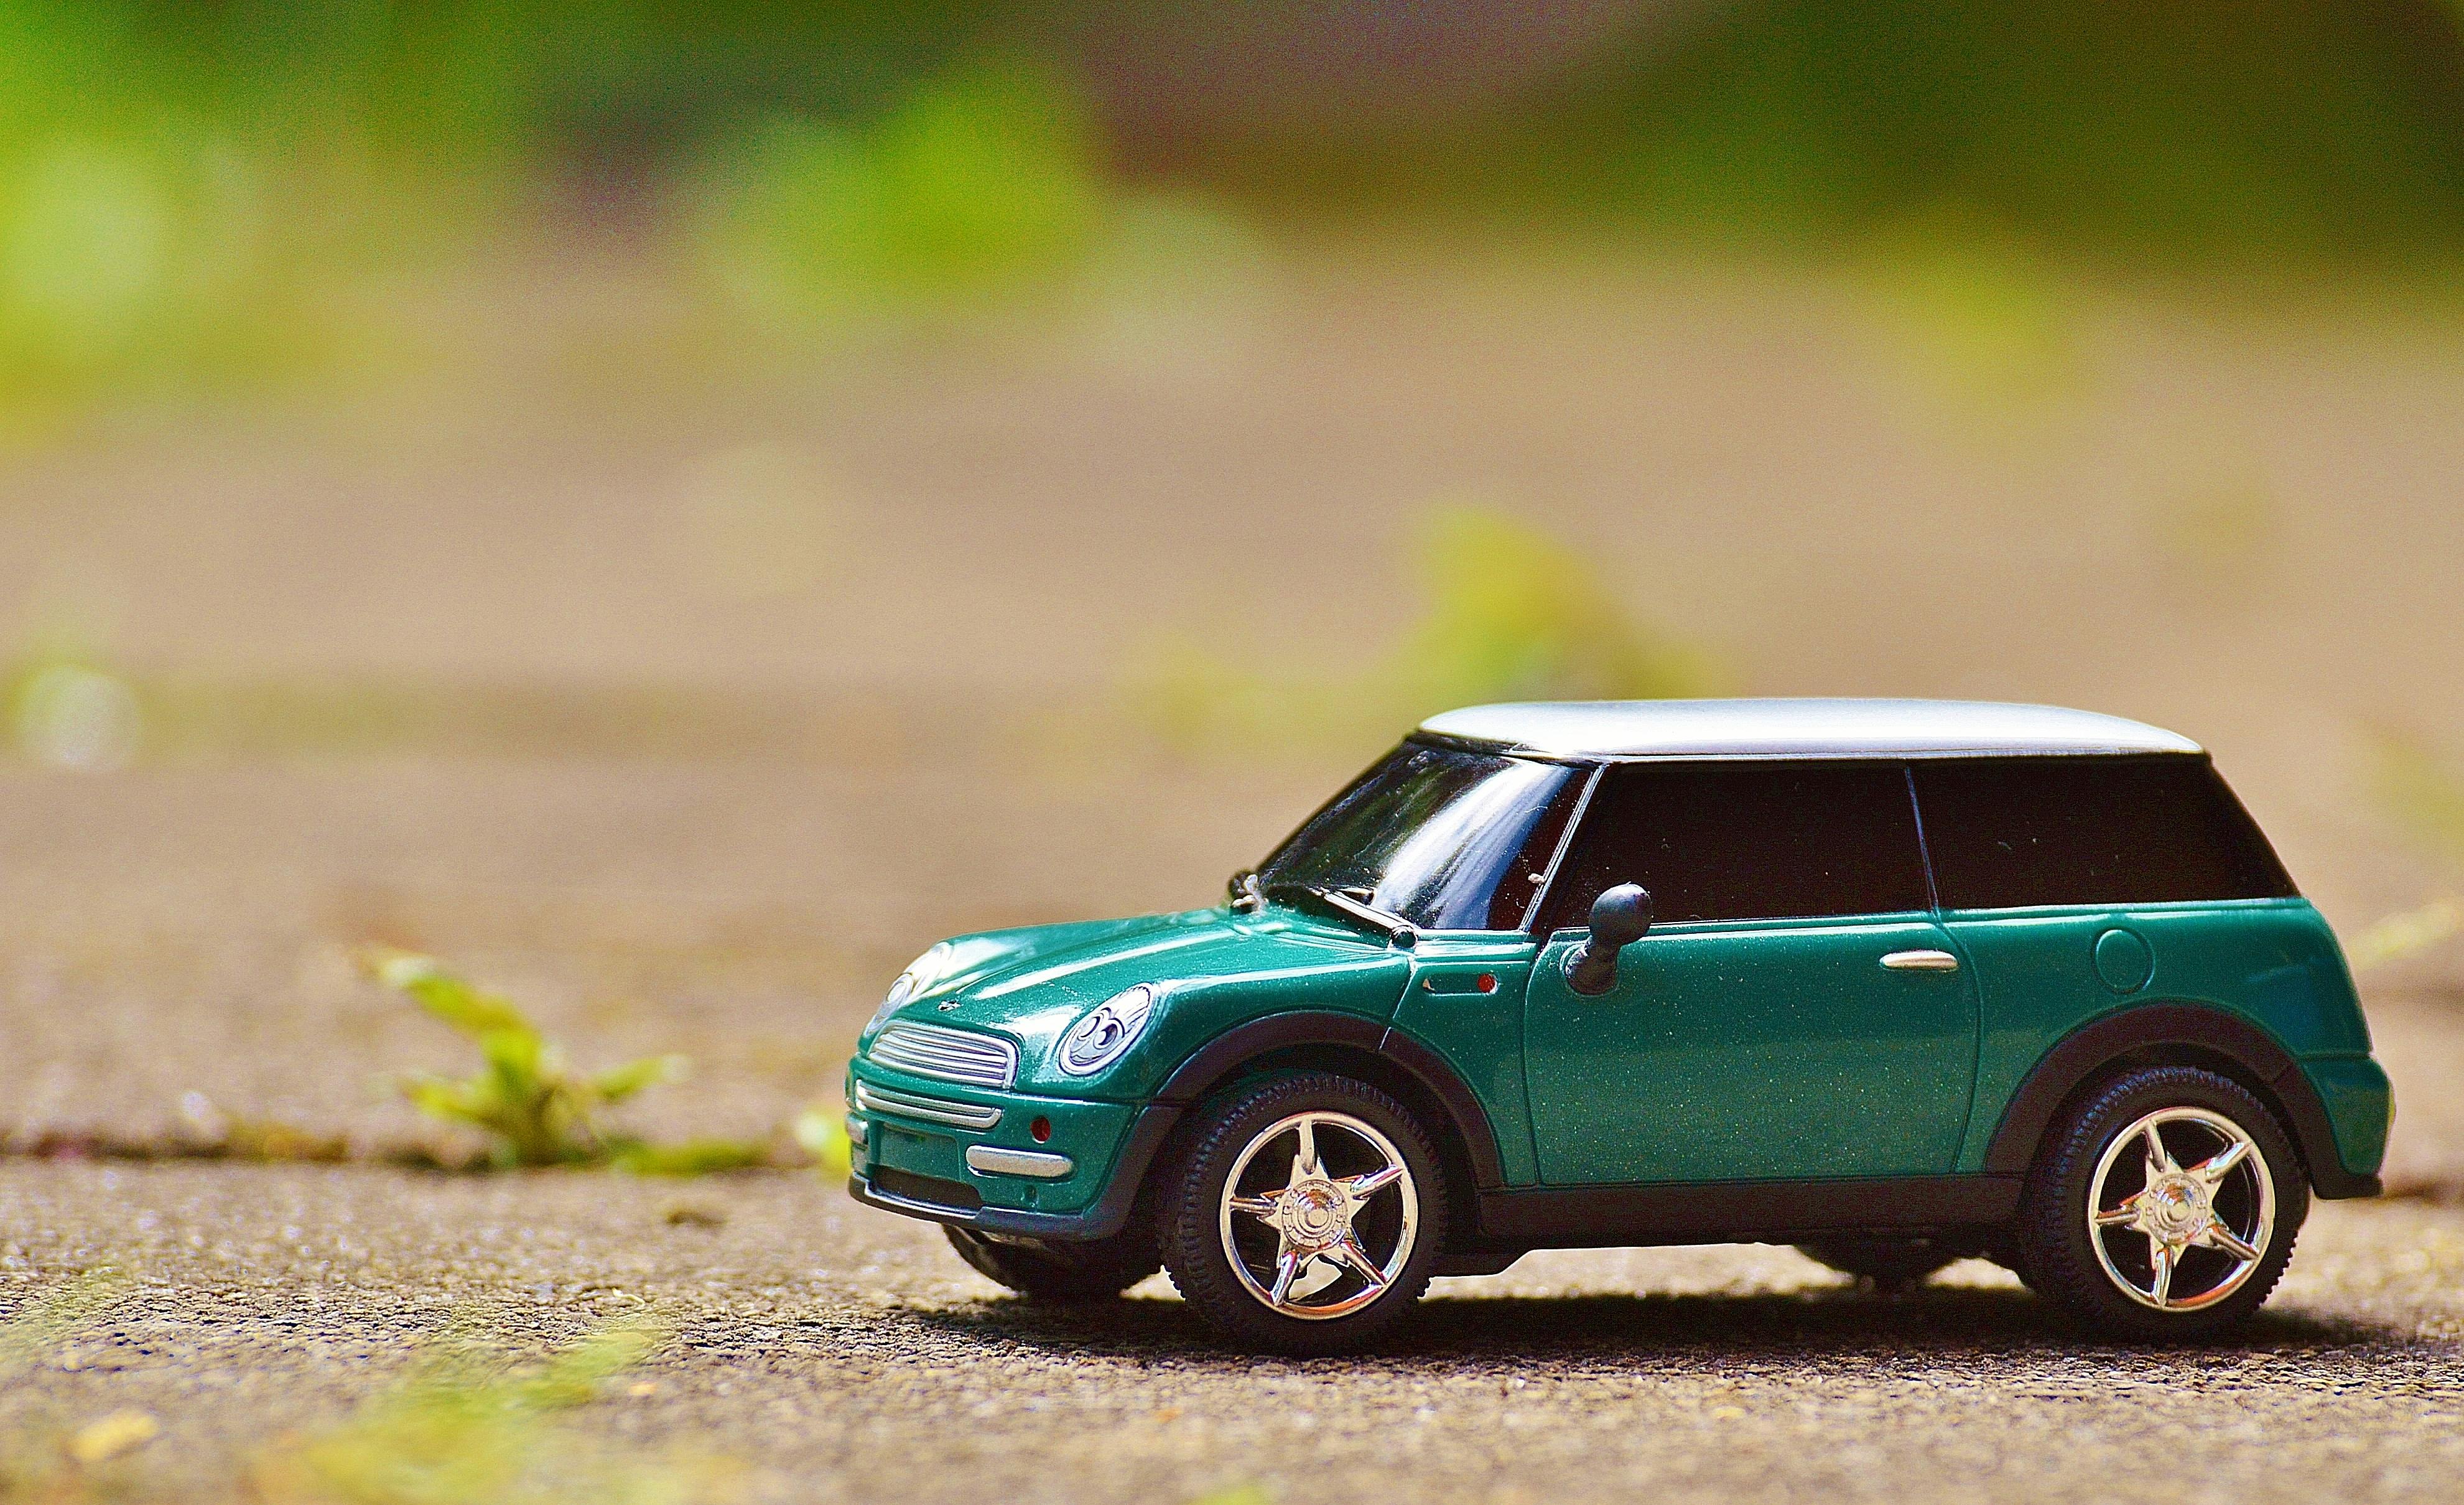 Toy Car Photos, Download The BEST Free Toy Car Stock Photos & HD Images